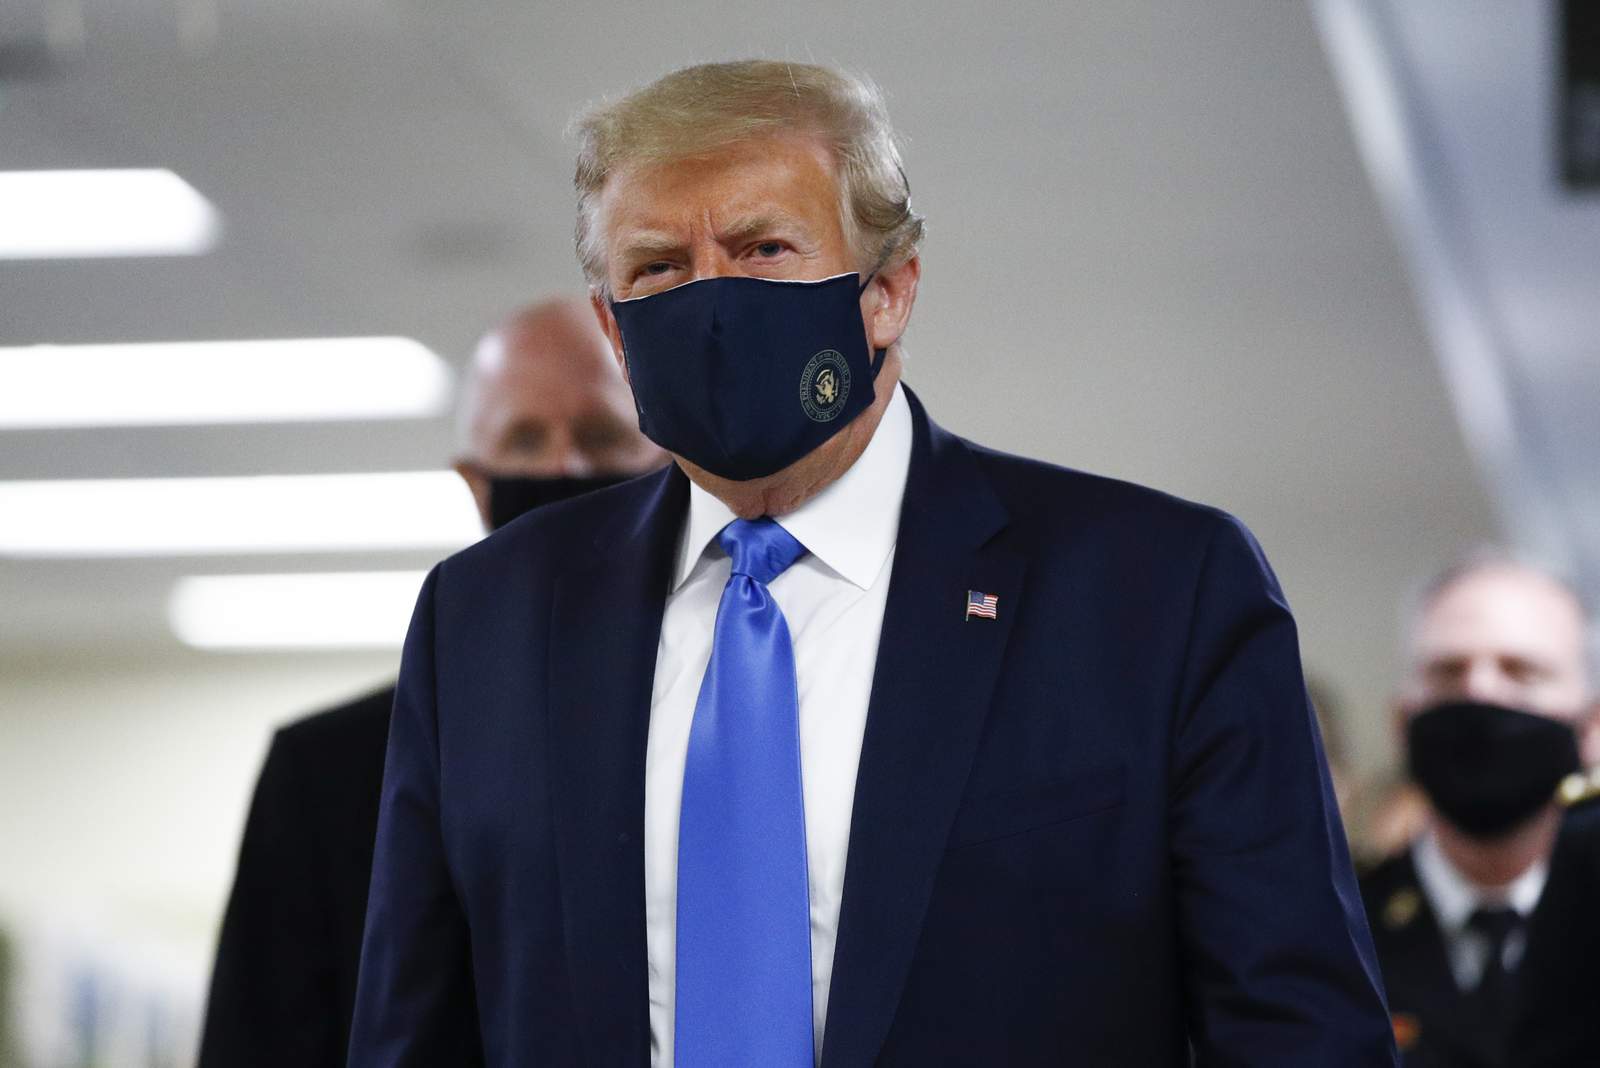 President Trump wears mask in public for first time during pandemic